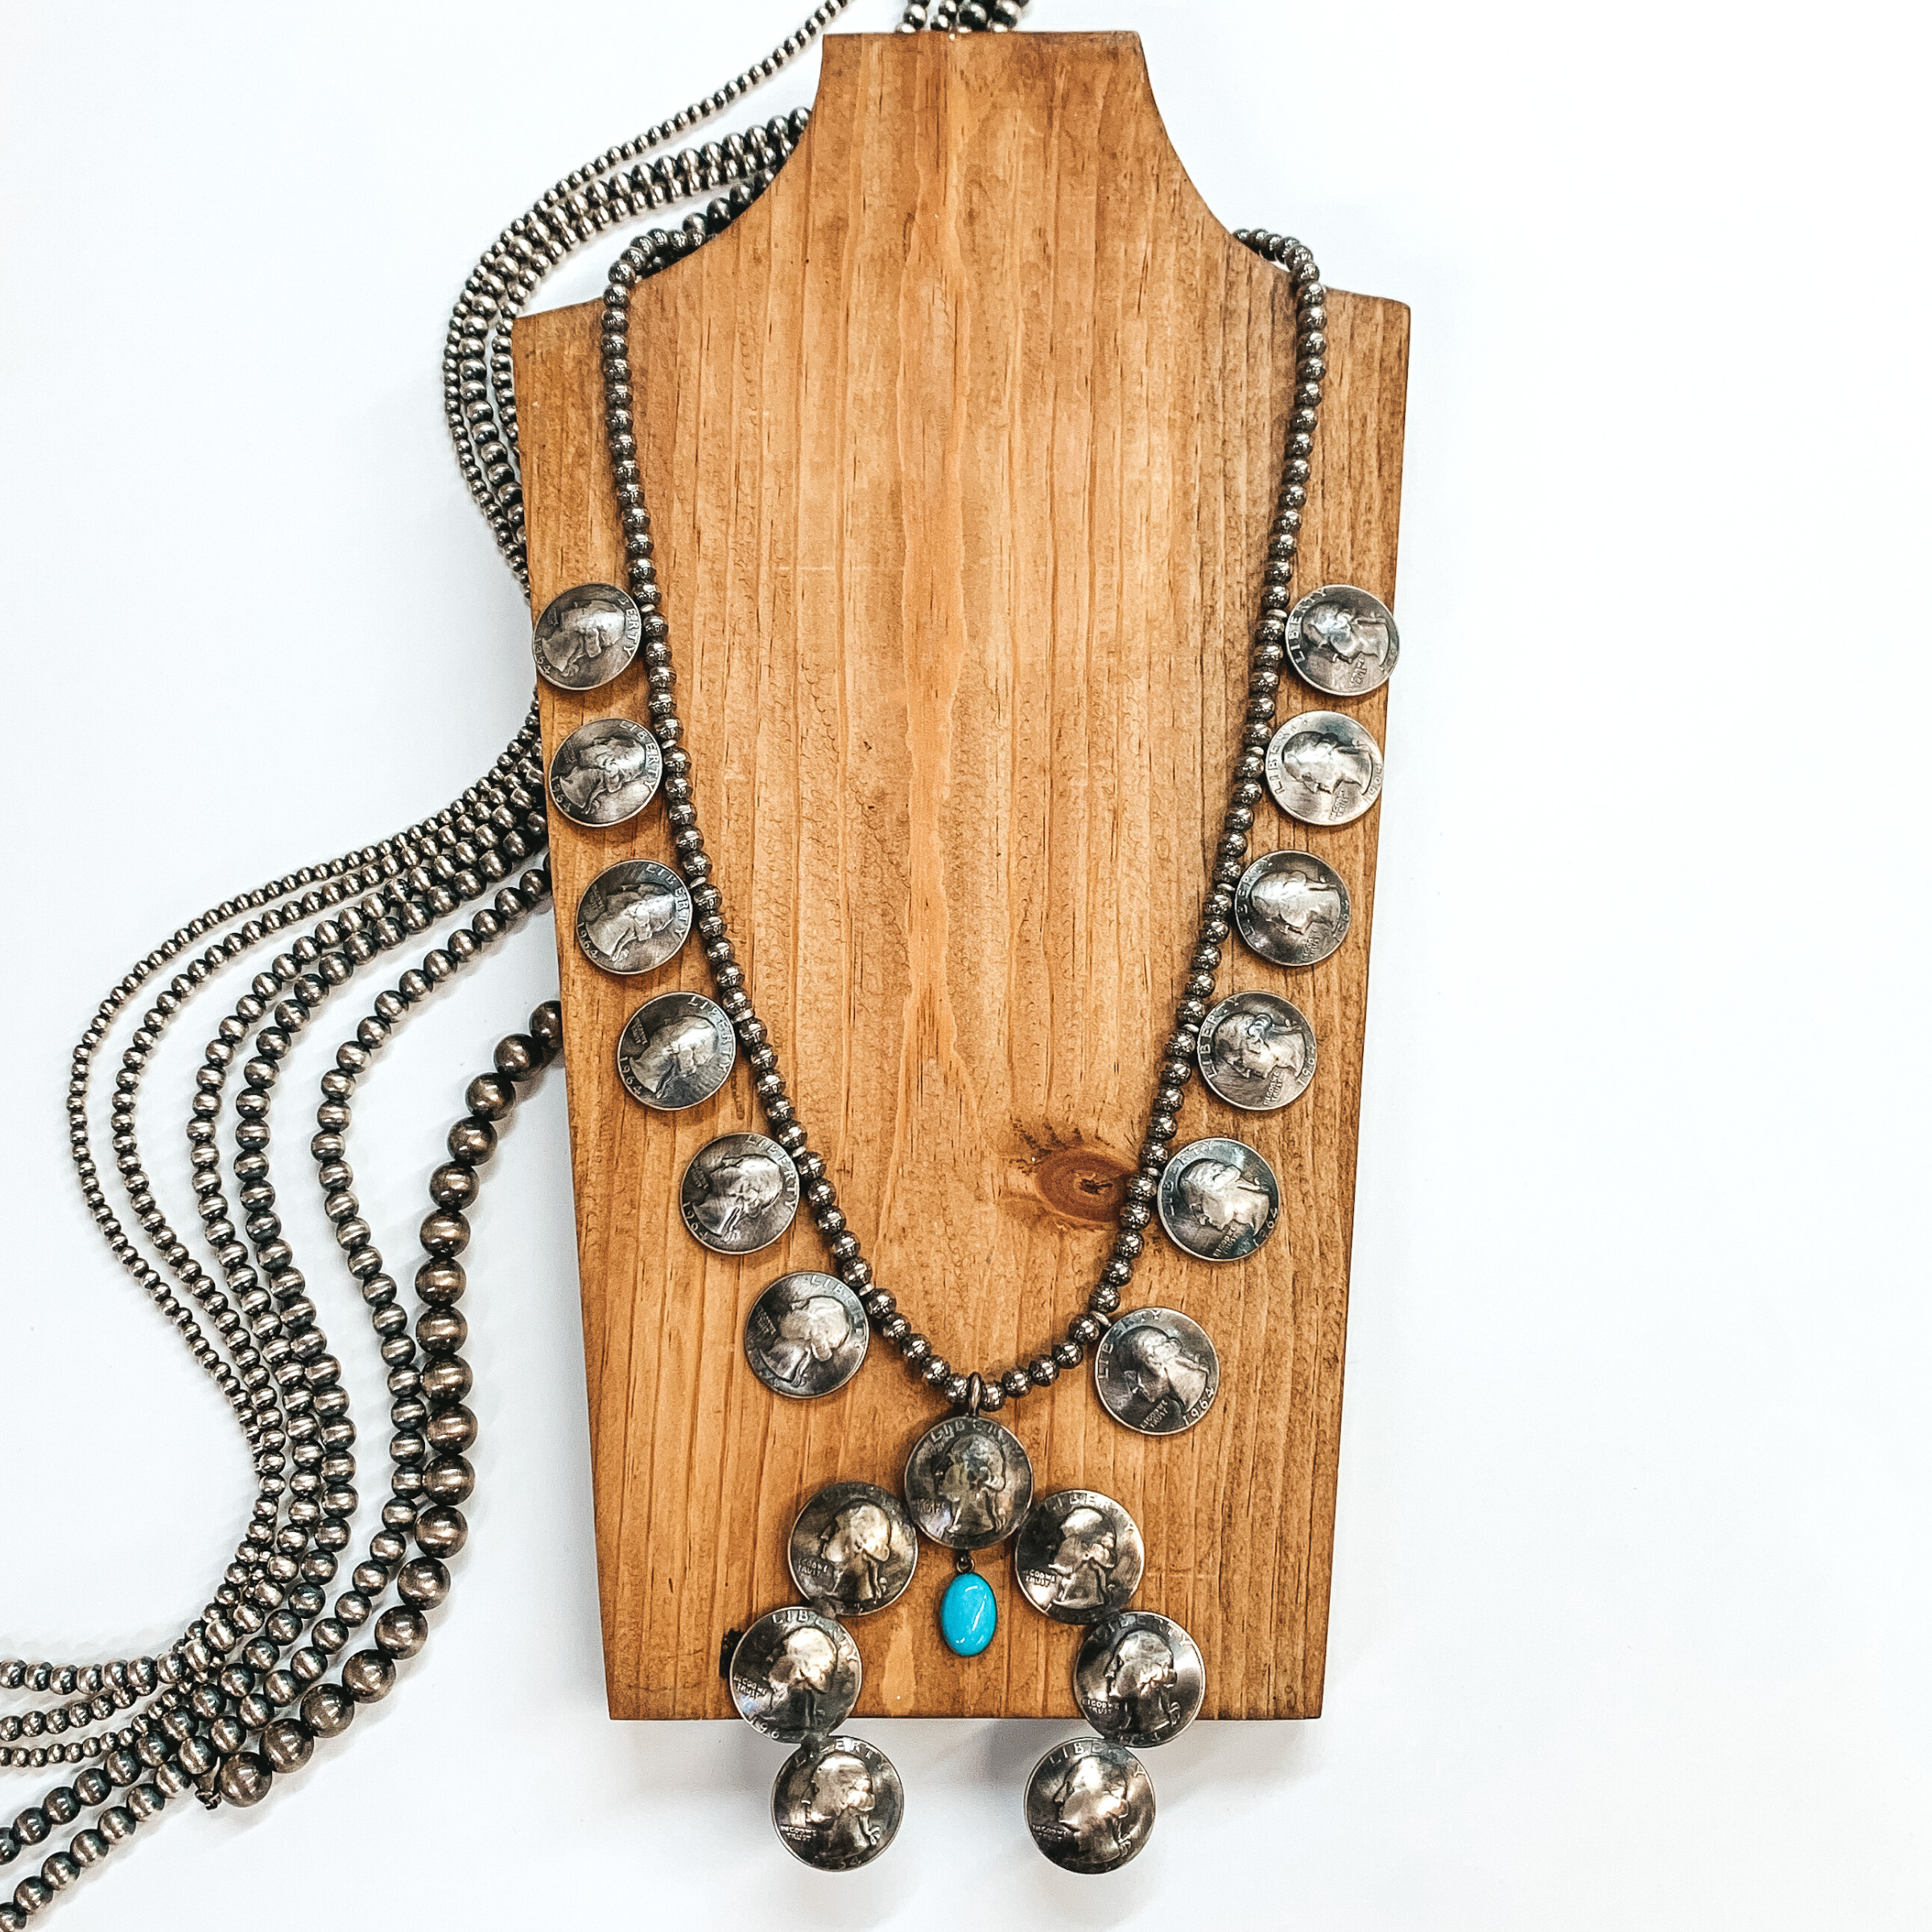 Navajo | Navajo Handmade Vintage Sterling Silver Quarter Naja Necklace with Hanging Turquoise Stone - Giddy Up Glamour Boutique